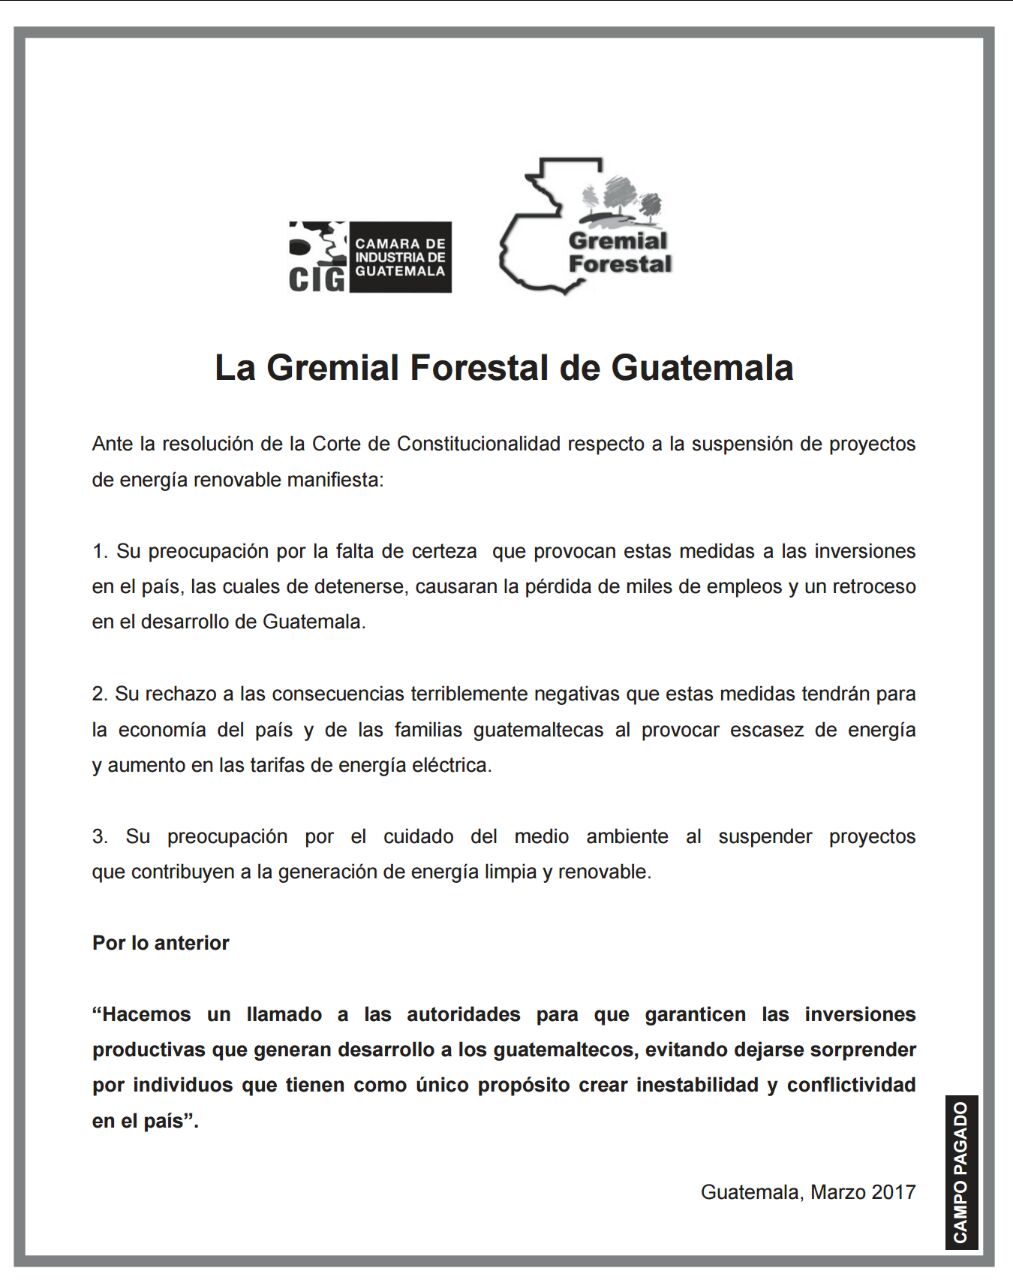 Gremial Forestal